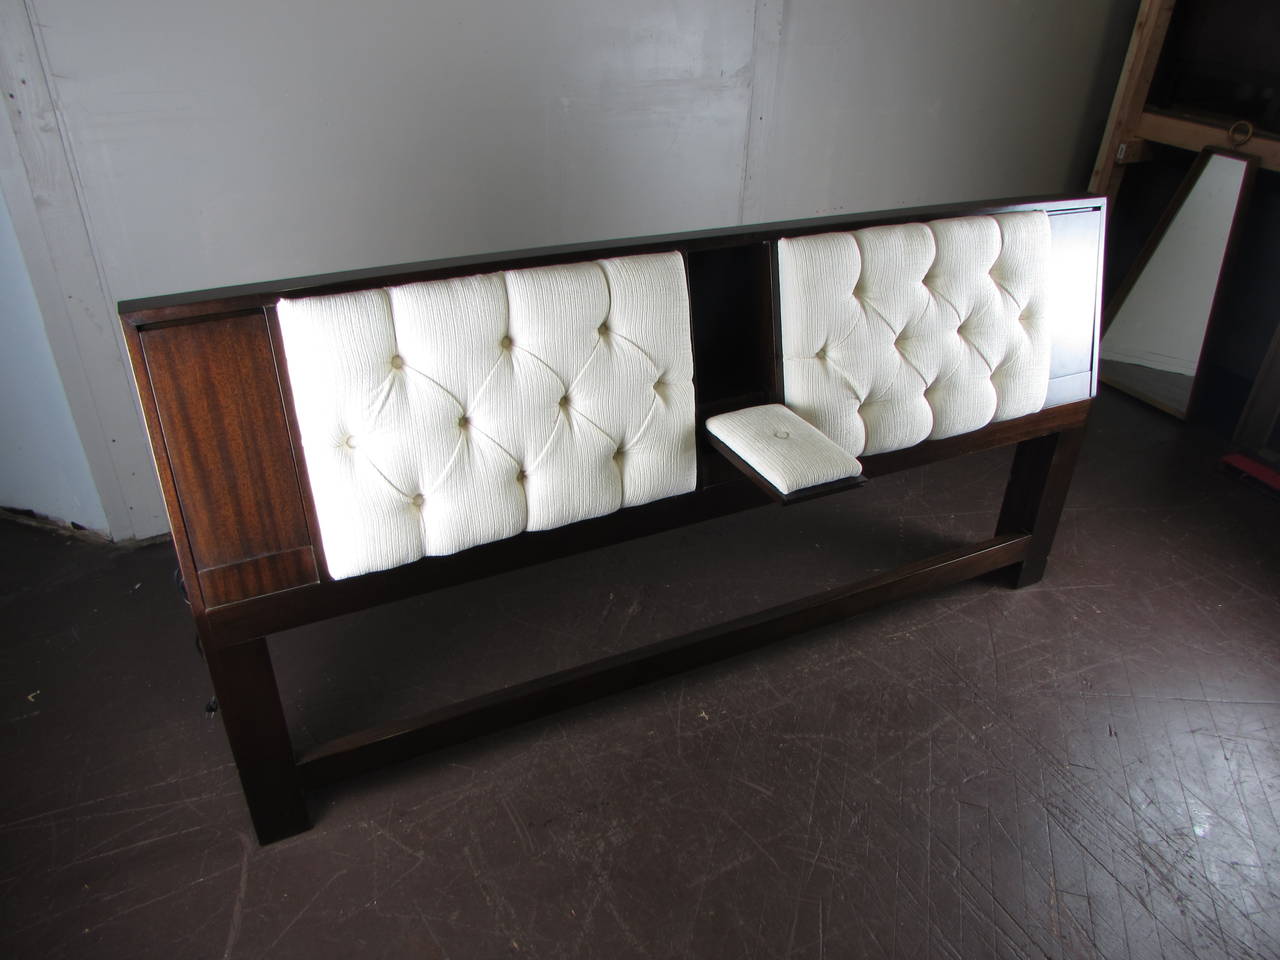 Dark mahogany headboard with reading lights and armrest by Harvey Probber, 1965. Telescopic reading lights and armrest are hidden in panels that fold up for storage.

See this item in our private NYC showroom! Refine Limited is located in the heart